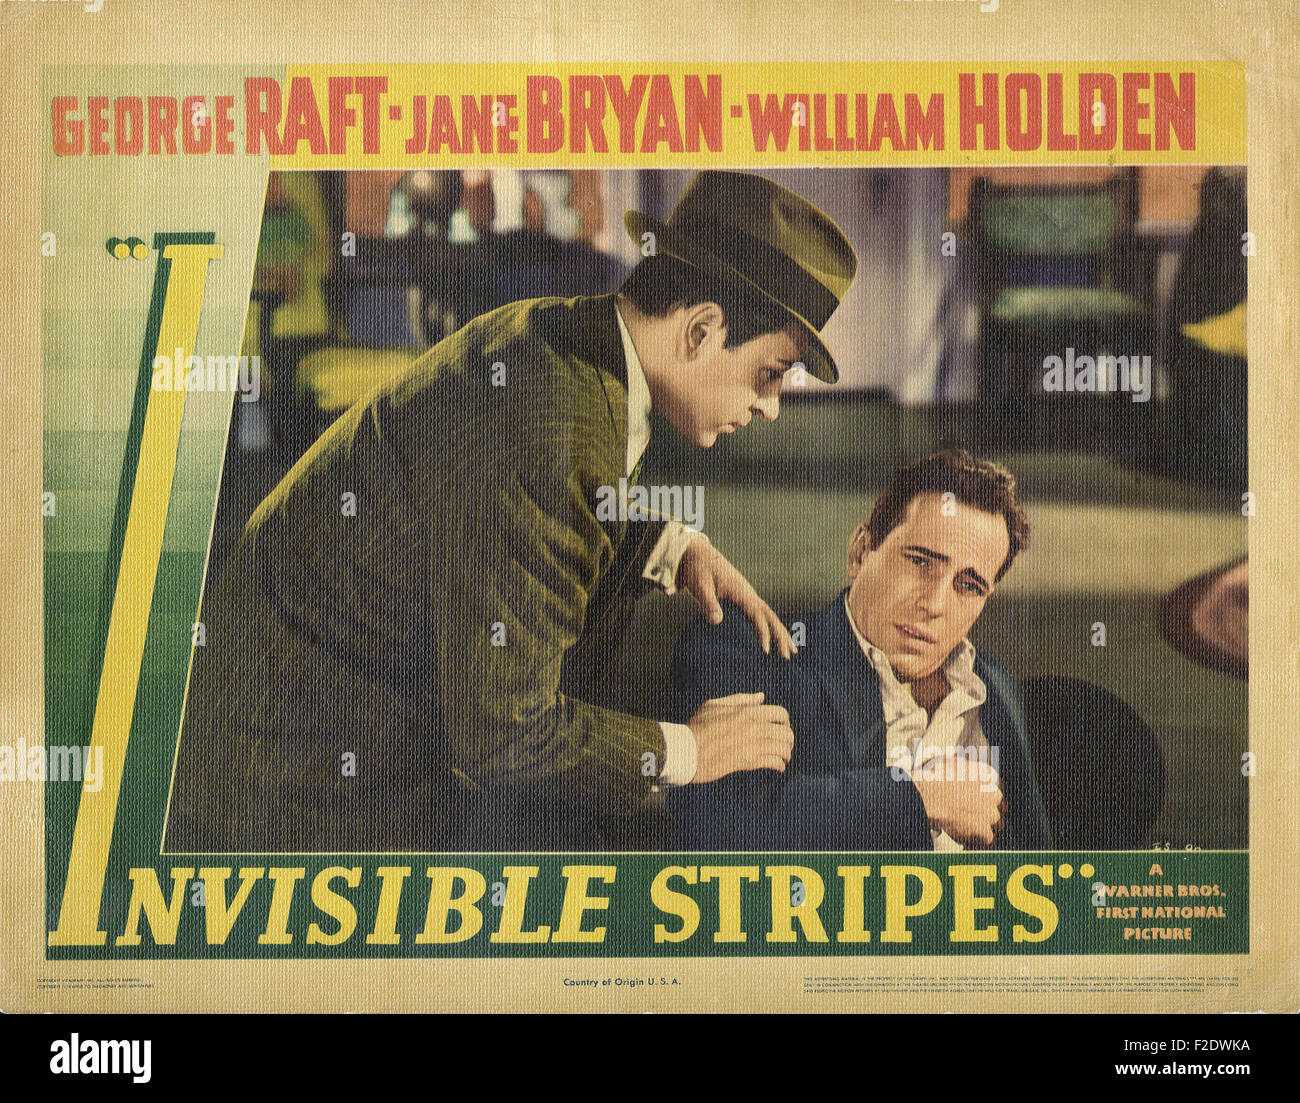 Invisible Stripes 04 - Movie Poster Stock Photo